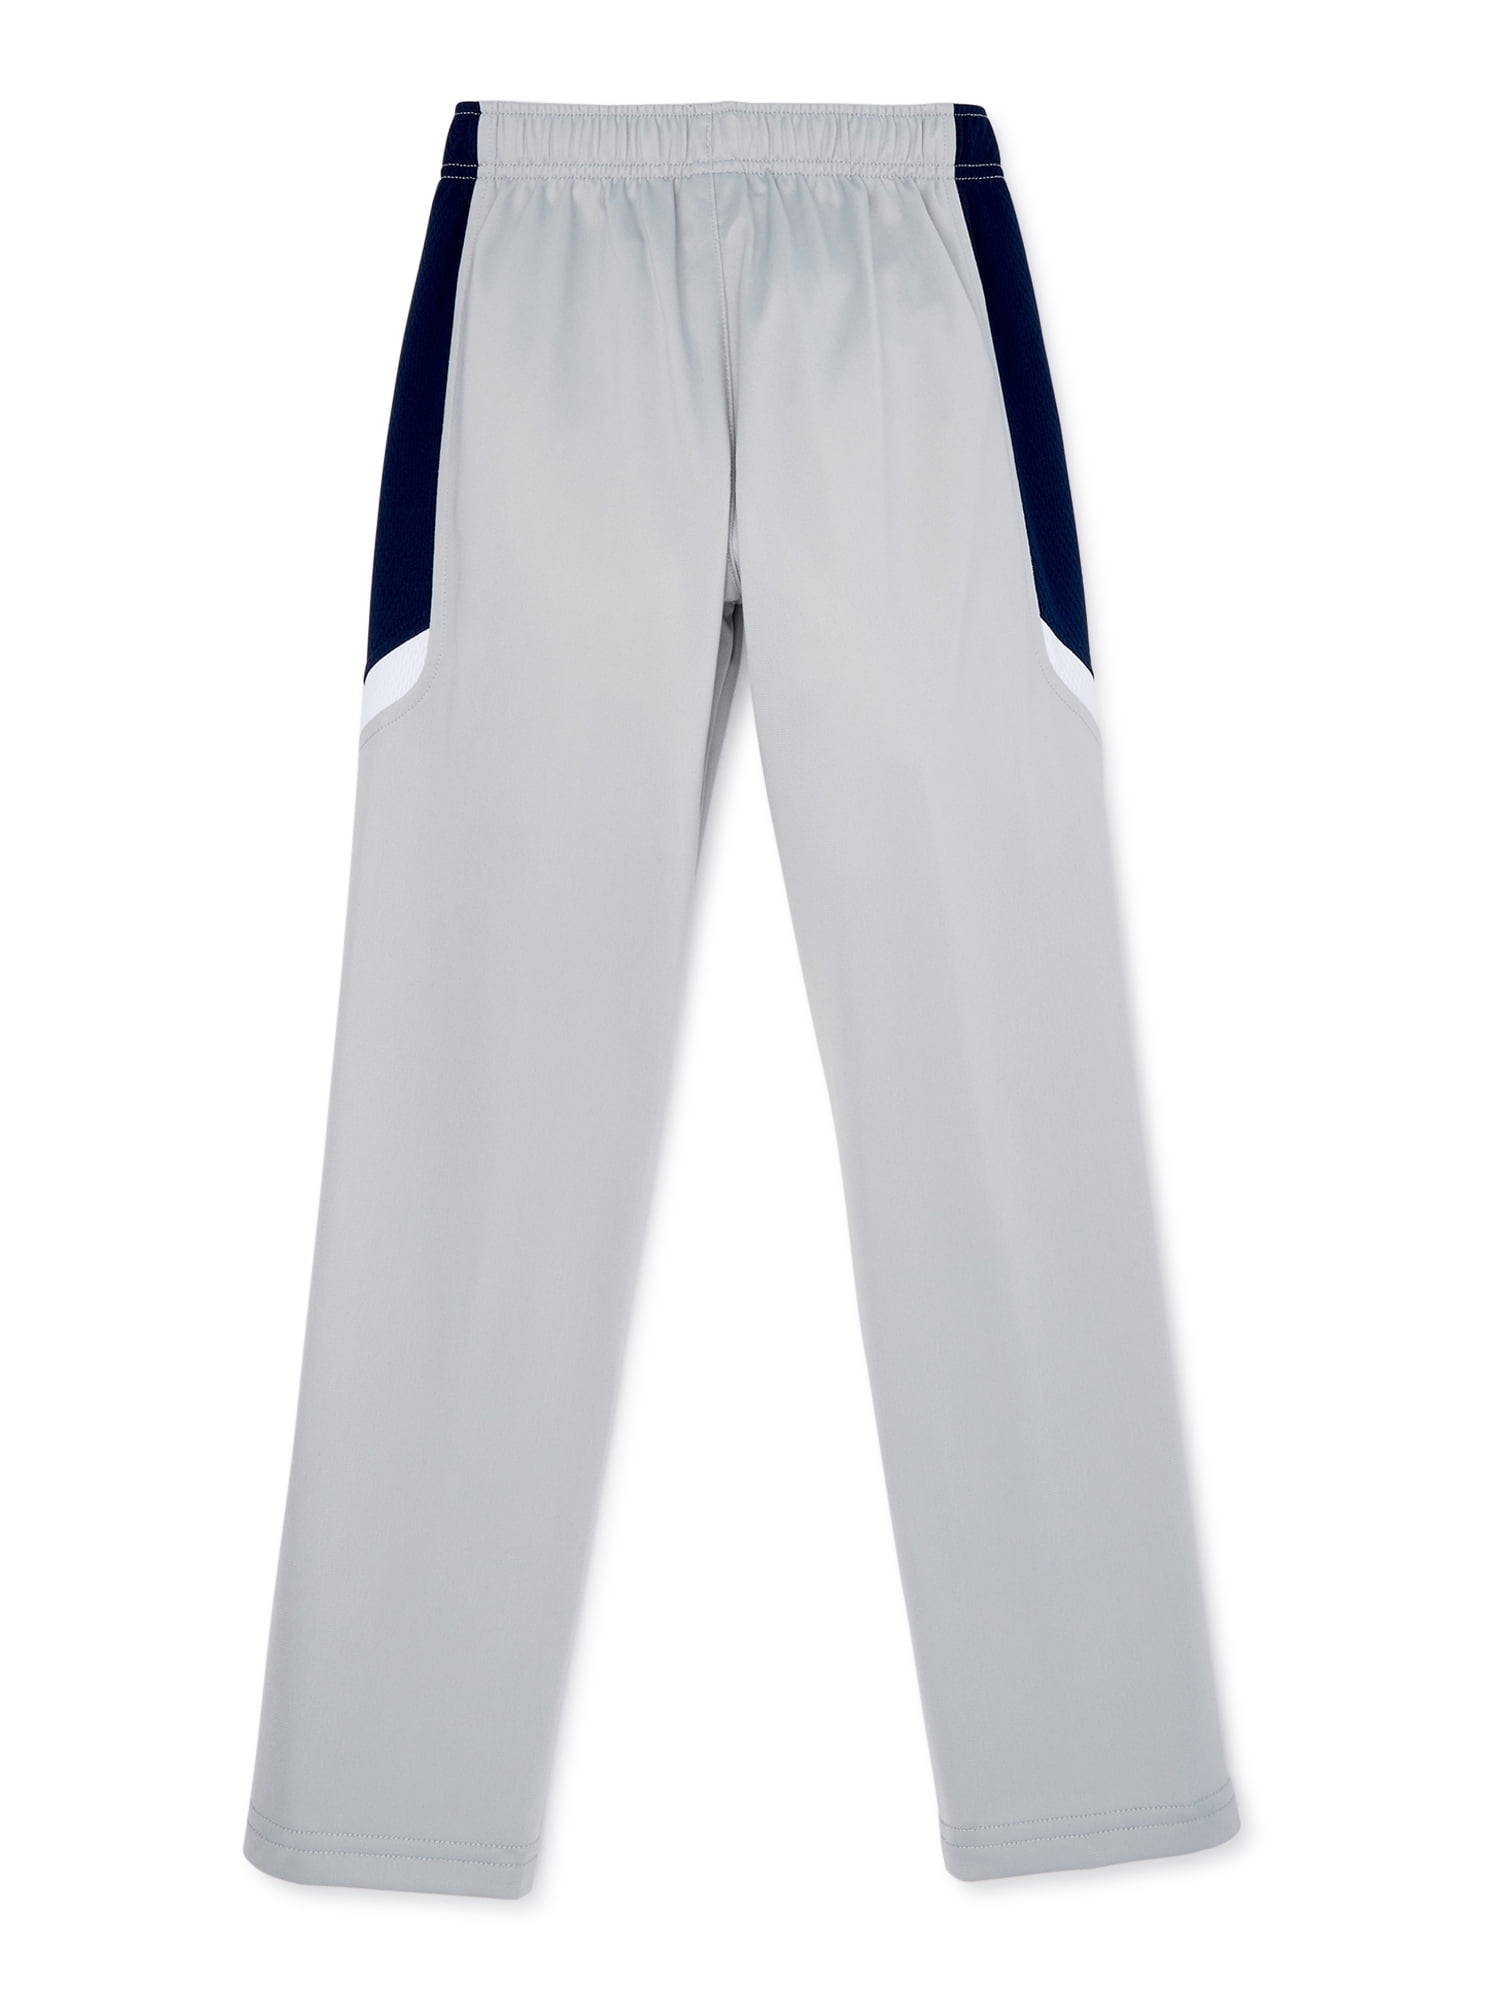 Athletic Works Boys Tricot Track Pants, Sizes 4-18 & Husky 